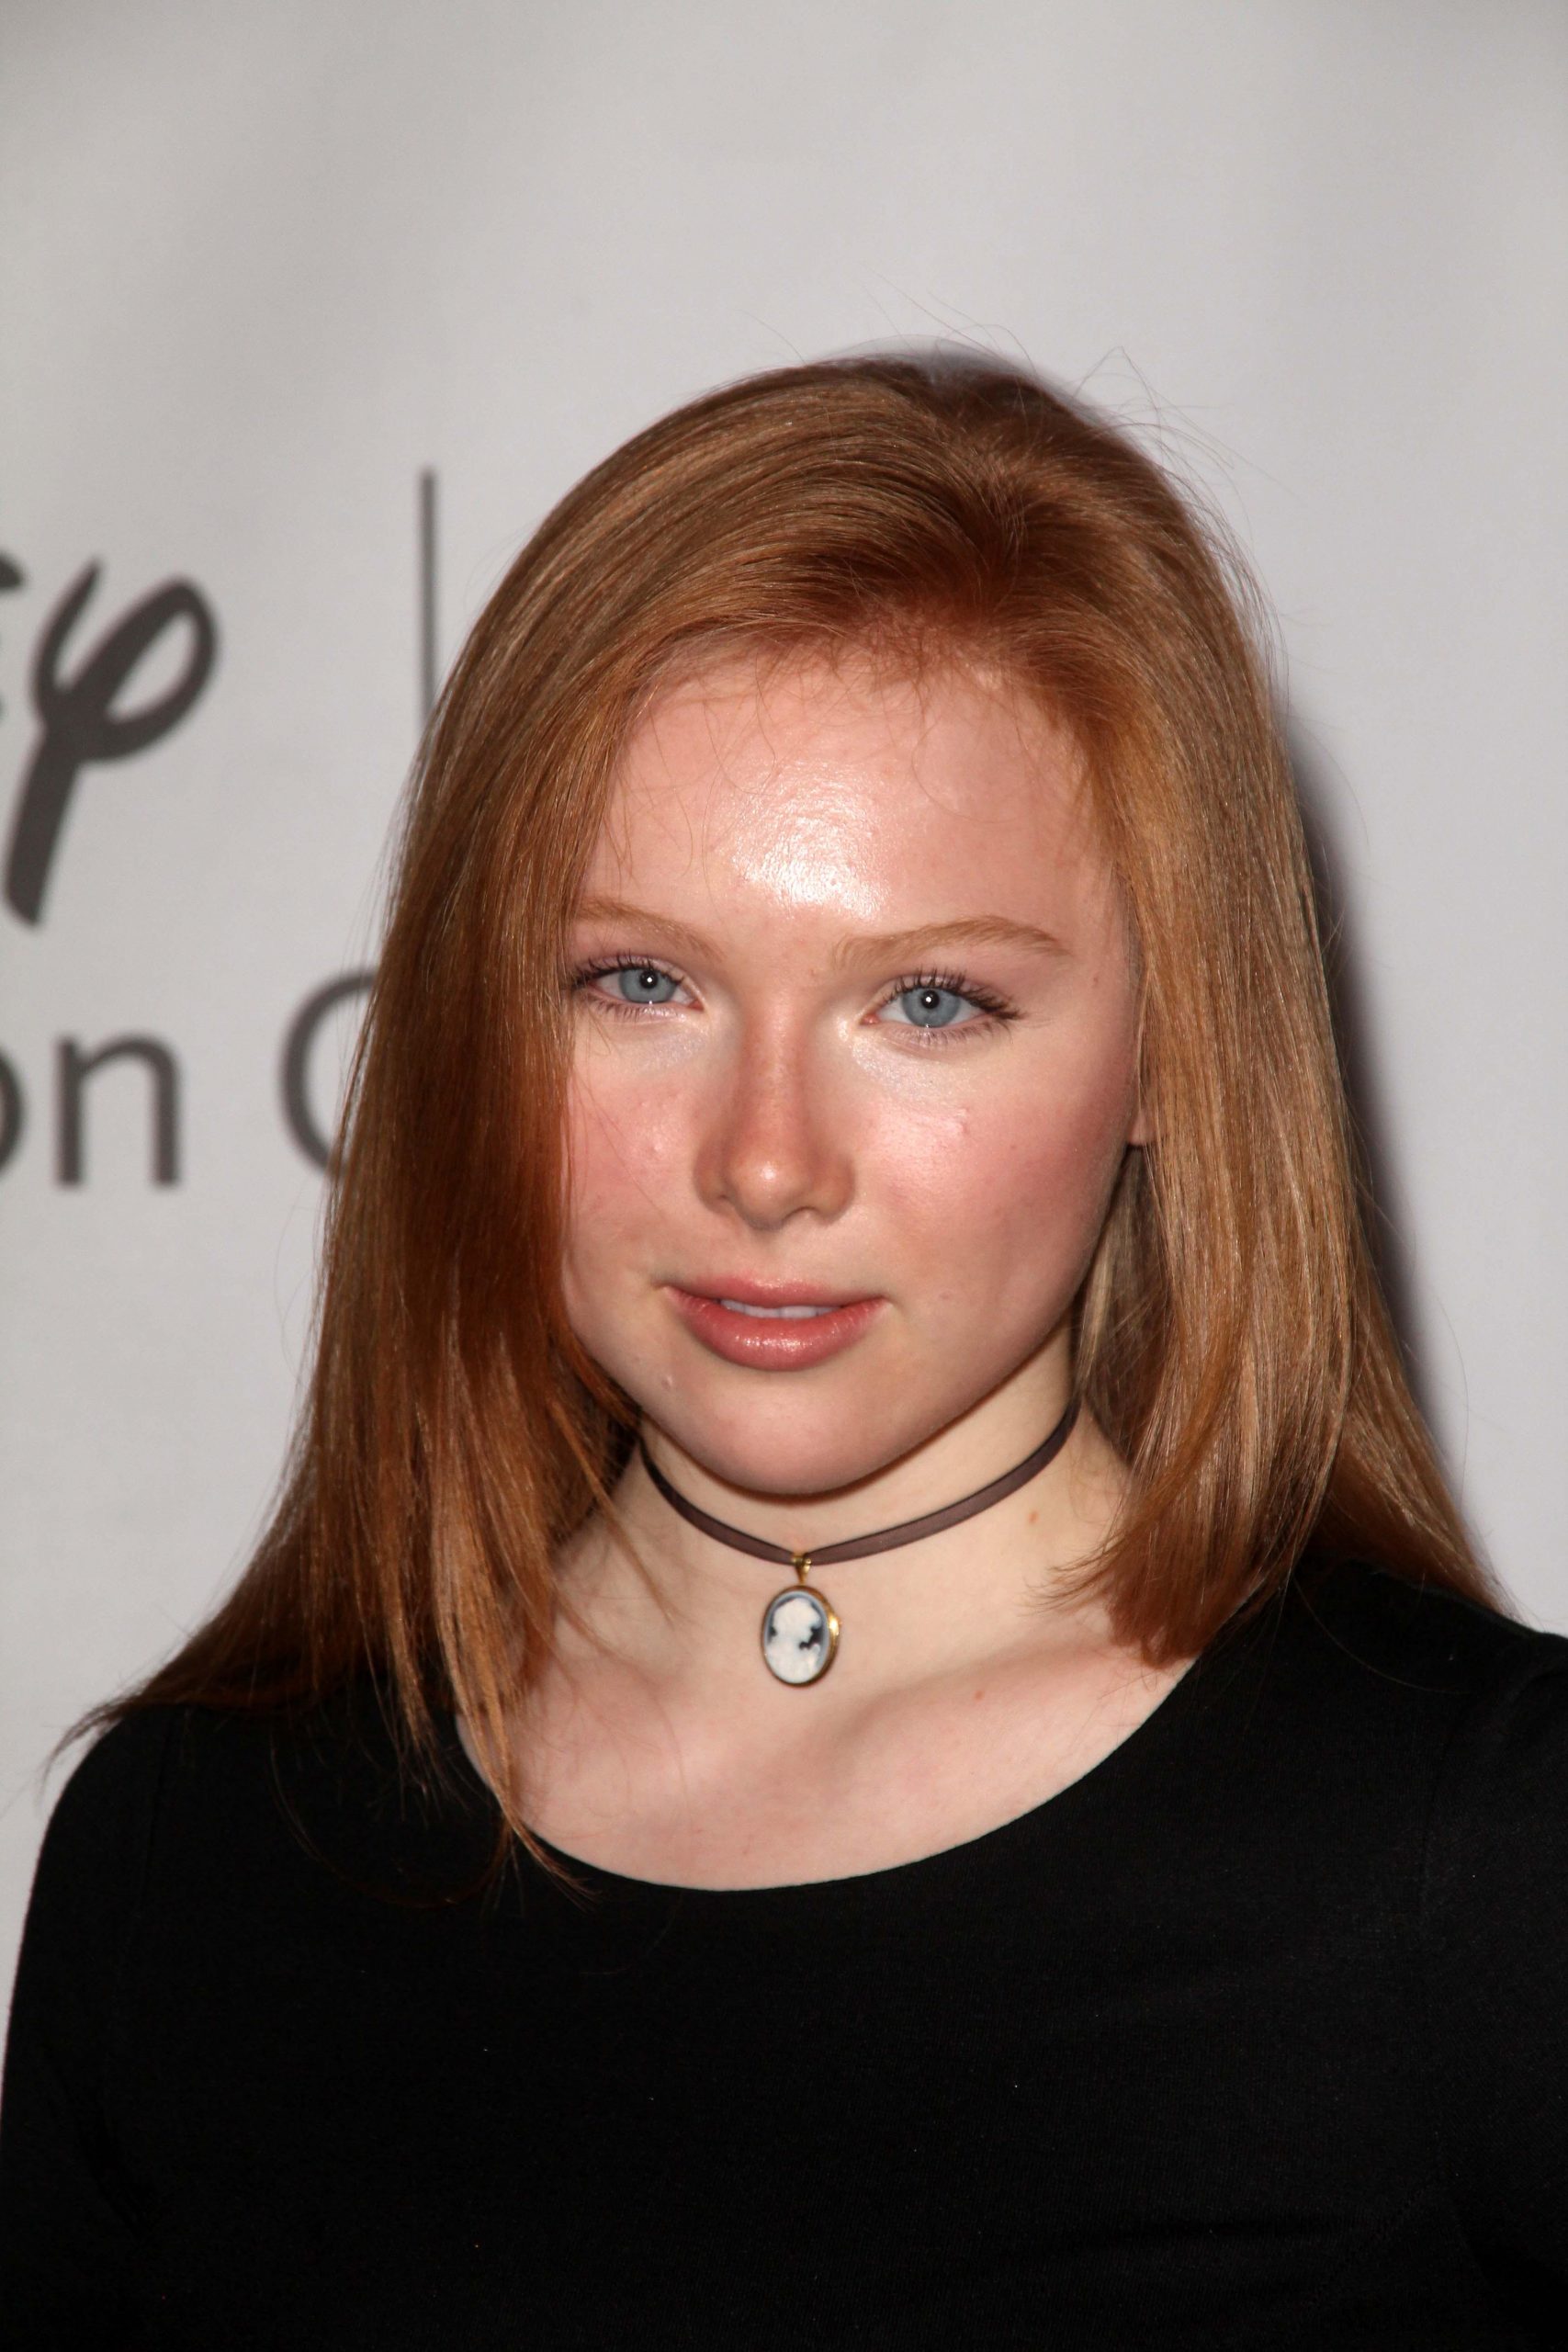 70+ Hot Pictures Of Molly C. Quinn Are God’s Gift For Her Die Hard Fans 33